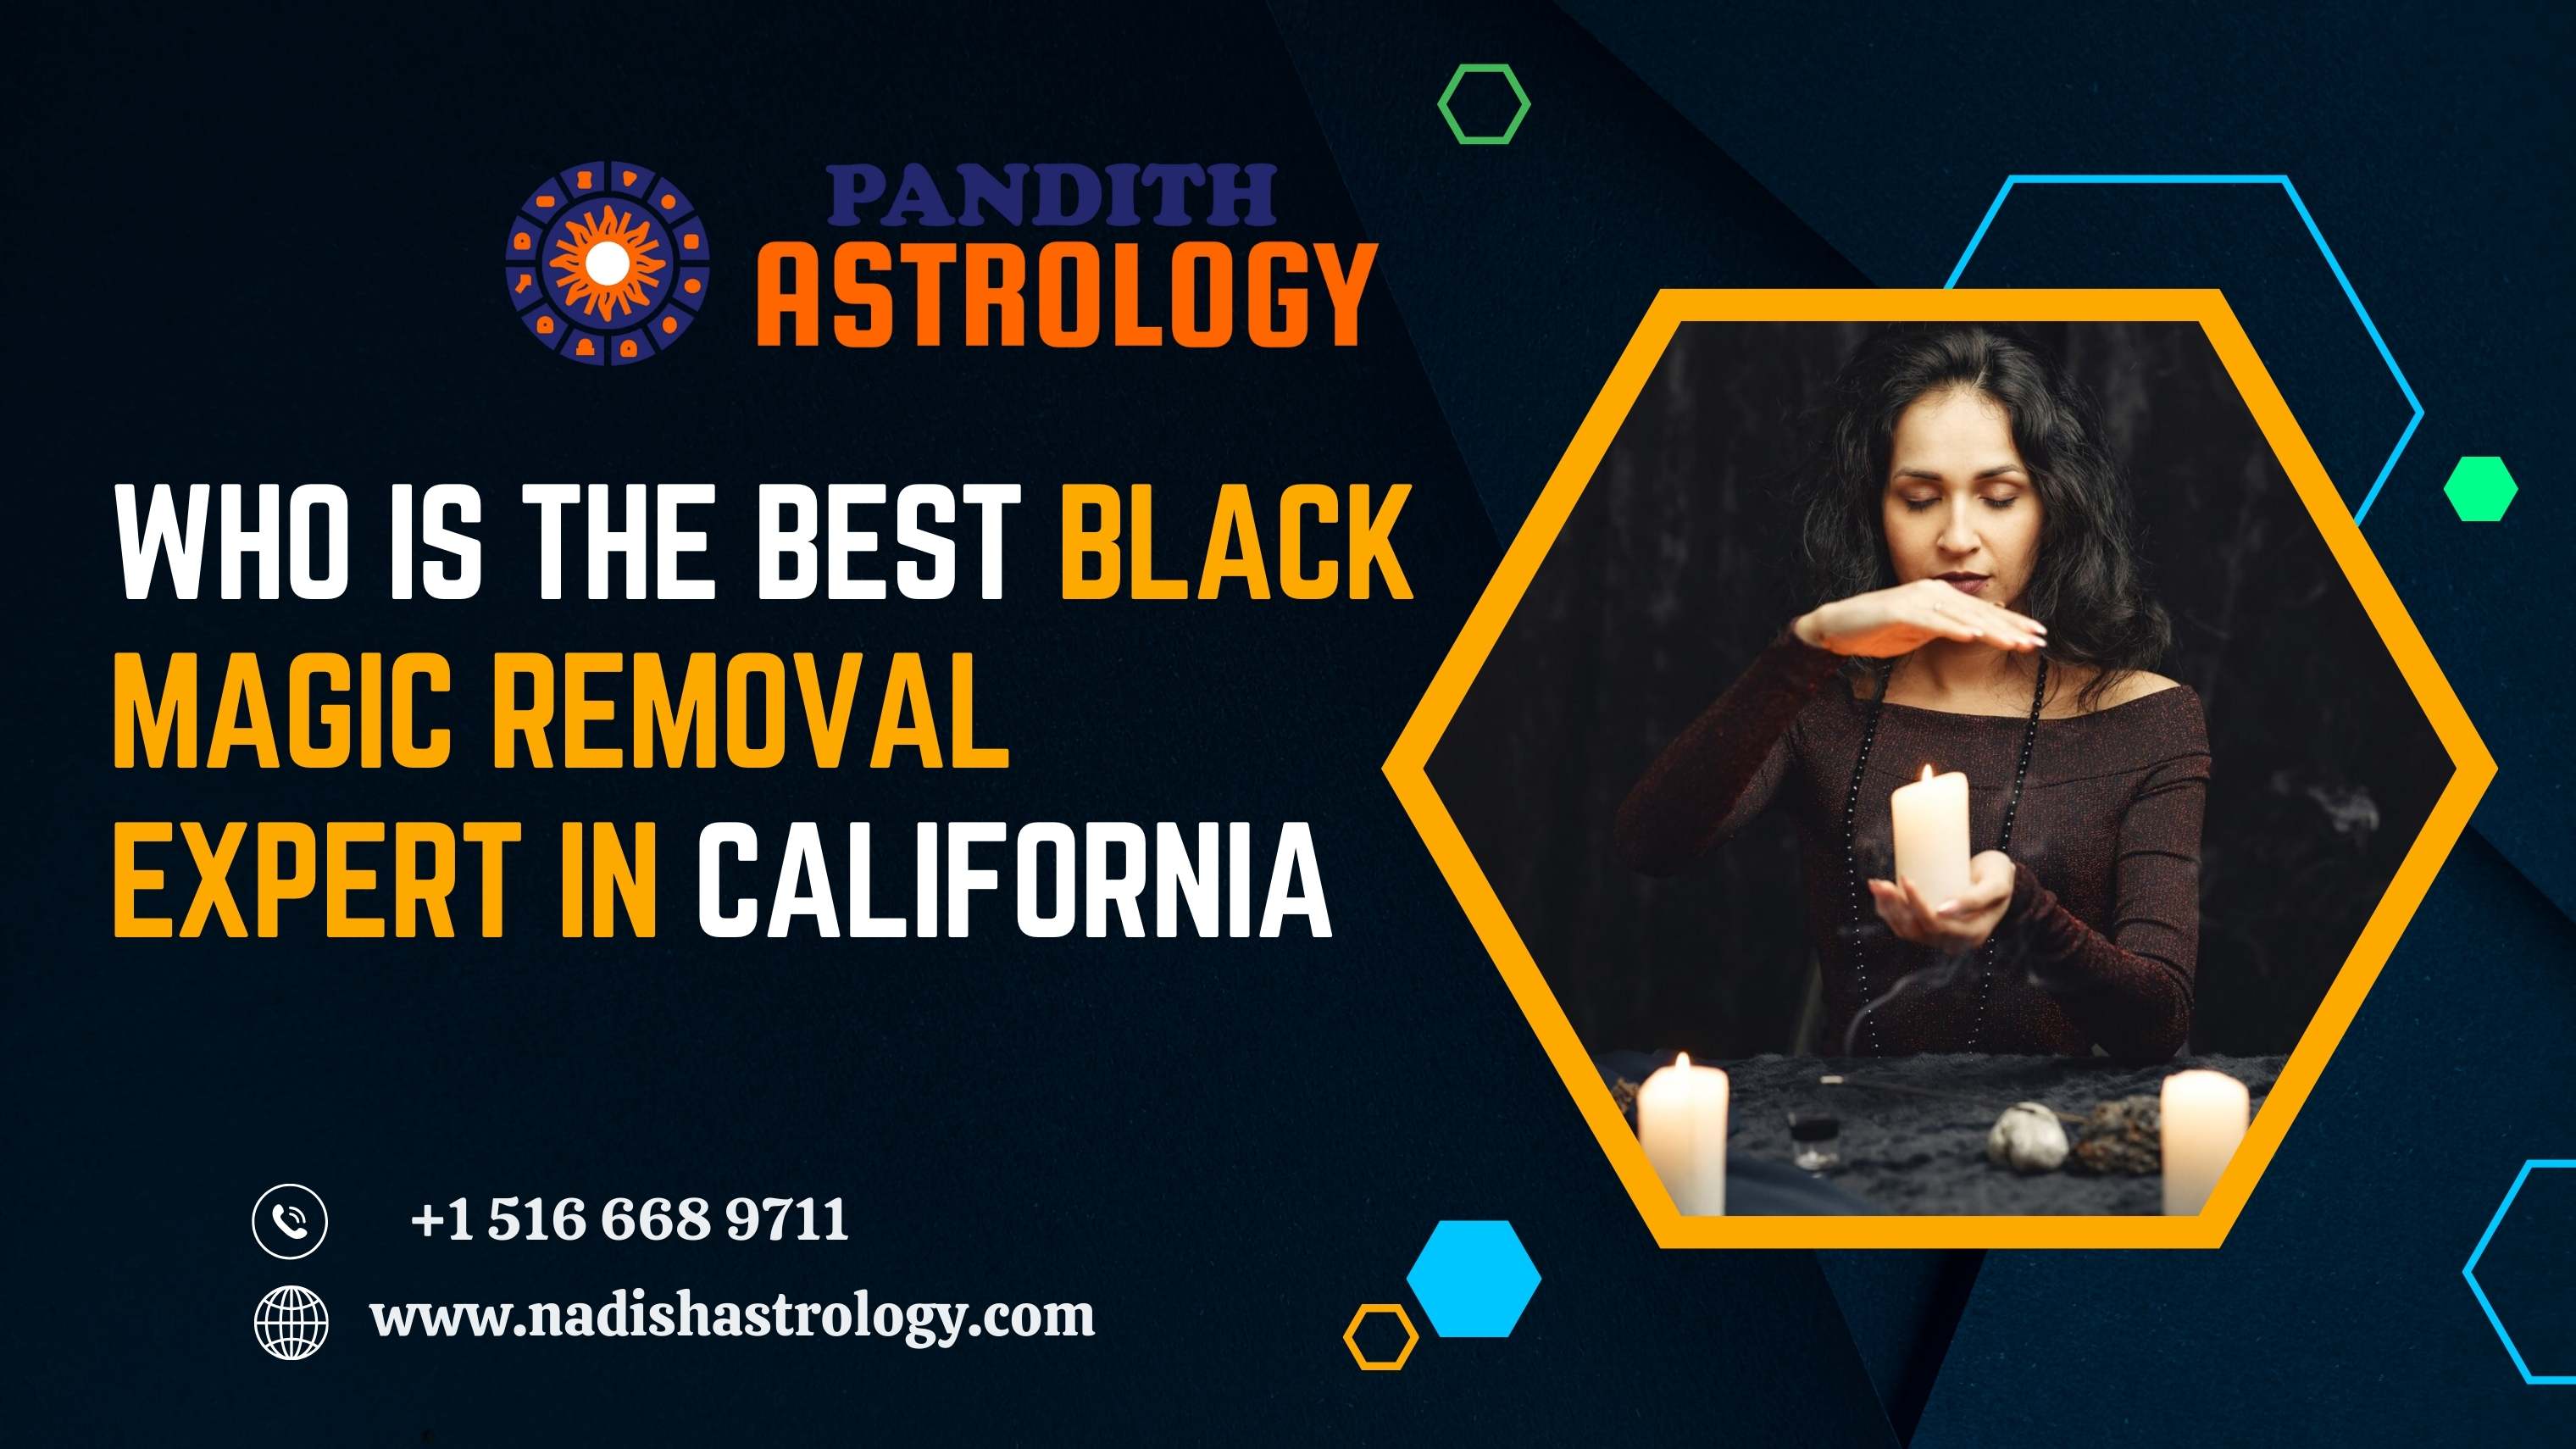 Who is the Best Black Magic Removal Expert in California